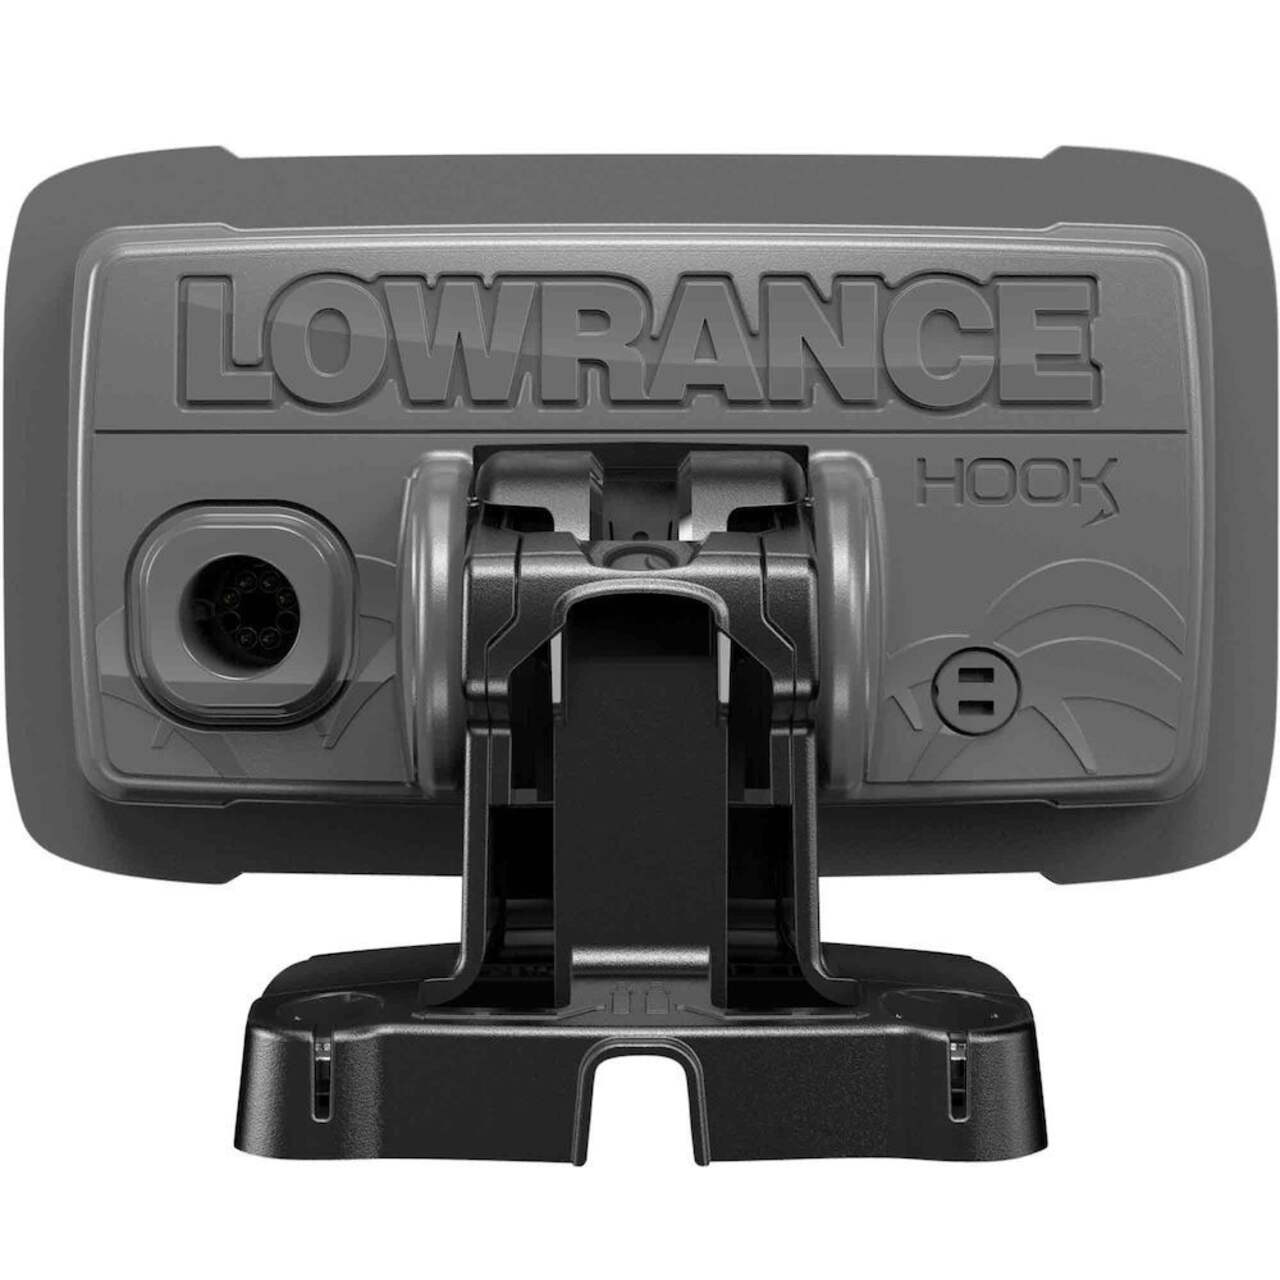 Lowrance Ice Fishing Transducer for all Lowrance HOOK2 4X Model Fish  Finders, Gray 000-14088-001